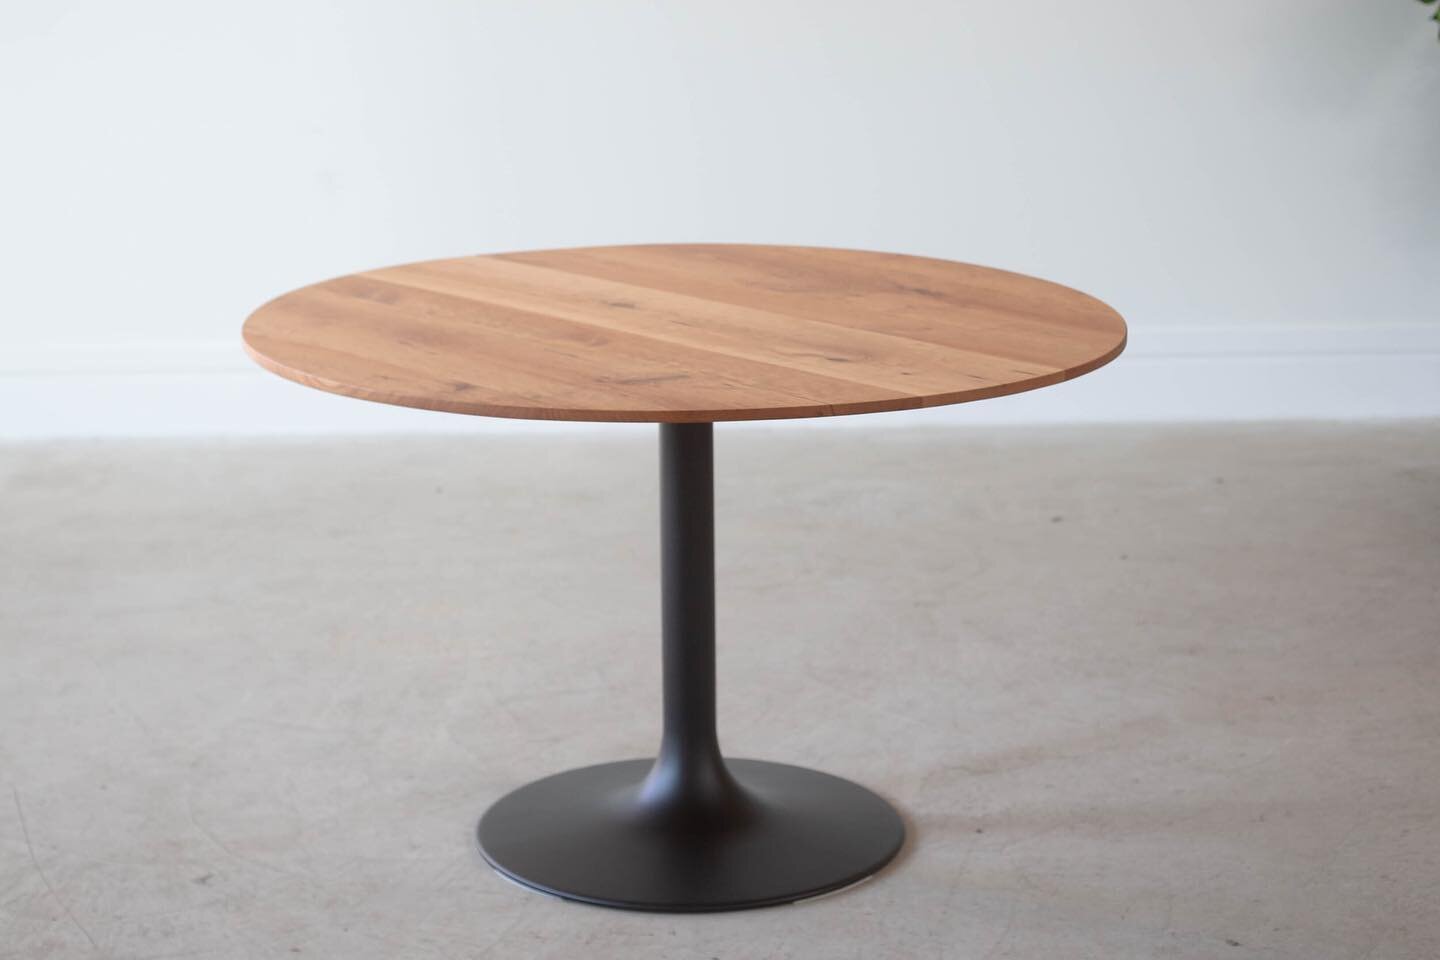 This modern dining table is currently available on our website! It is made of solid cherry with a trumpet-style black steel base. The top features a tapered edge profile.

It measures 48&rdquo; diameter and 30&rdquo; overall height and is $1750.

Vie